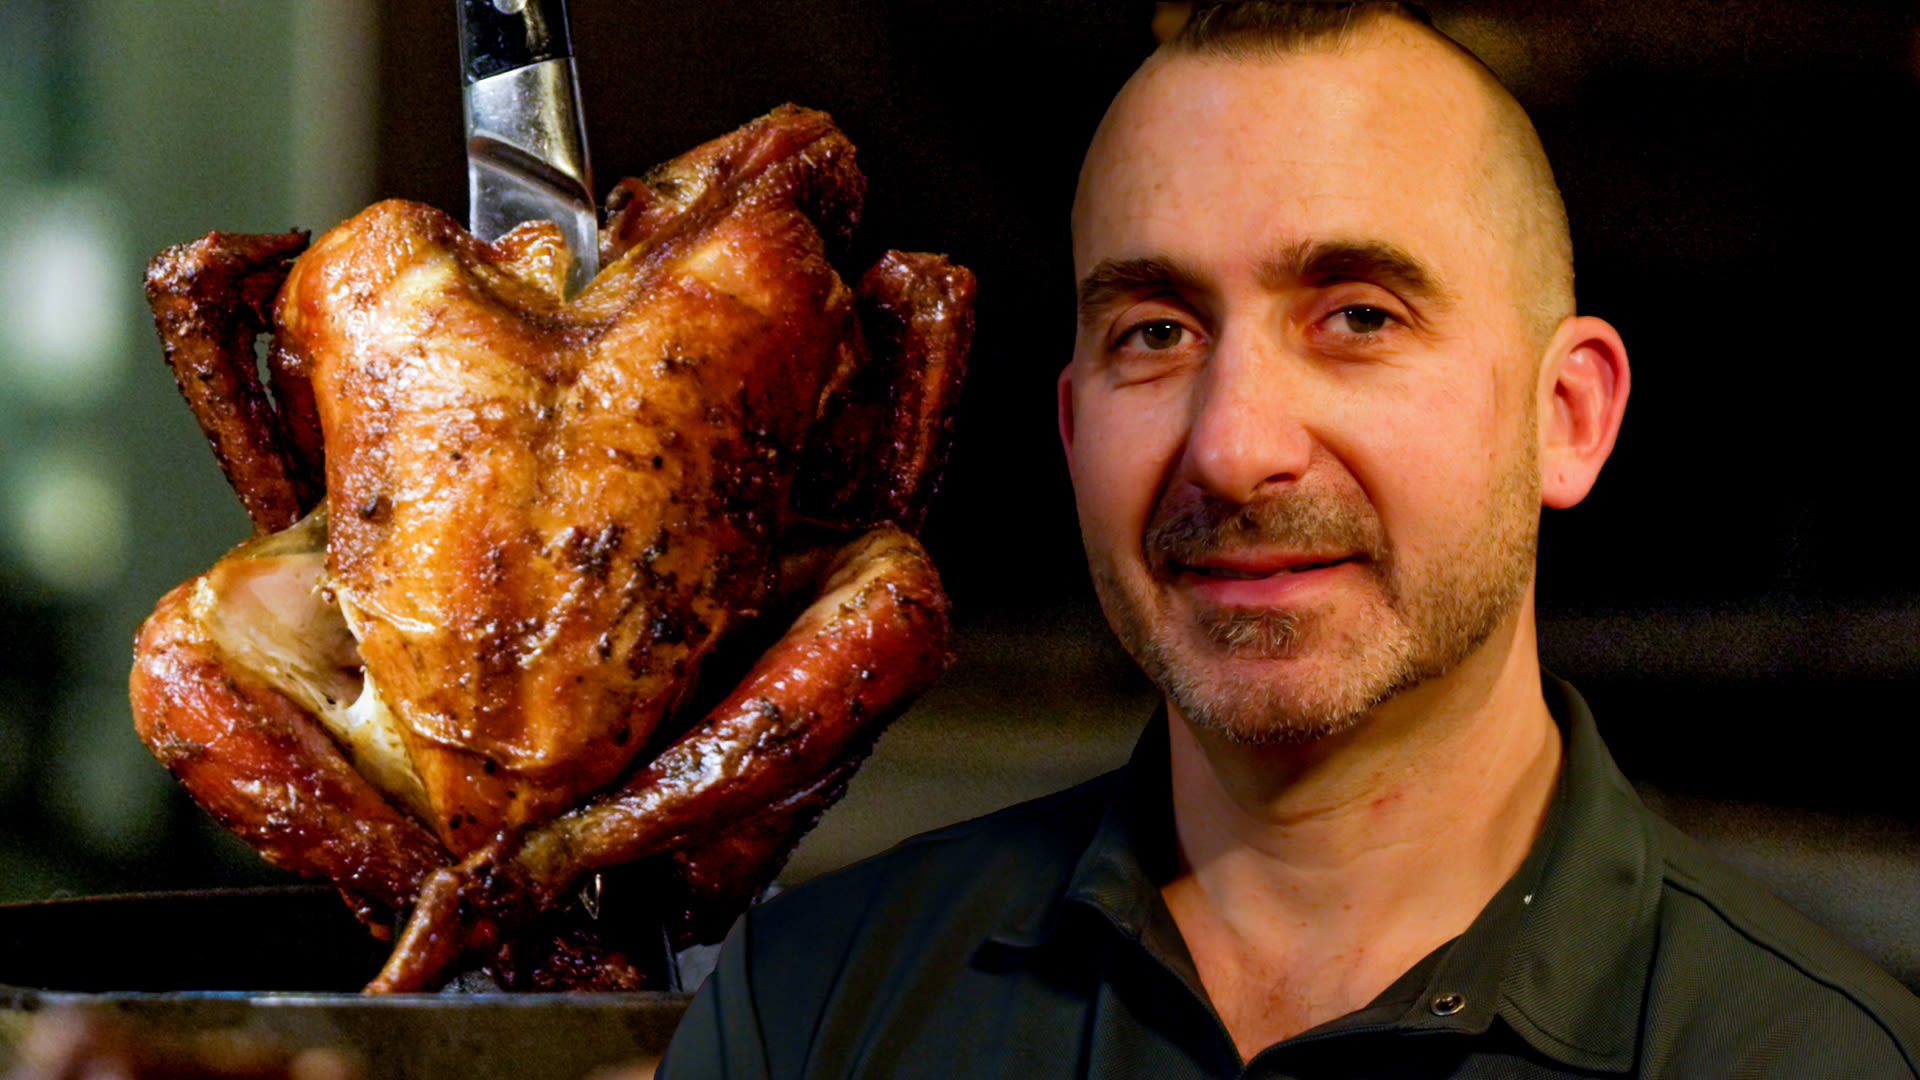 Watch: How Chef Marc Forgione Cooks His Chicken Over Wood Fire at N.Y.C.’s Peasant